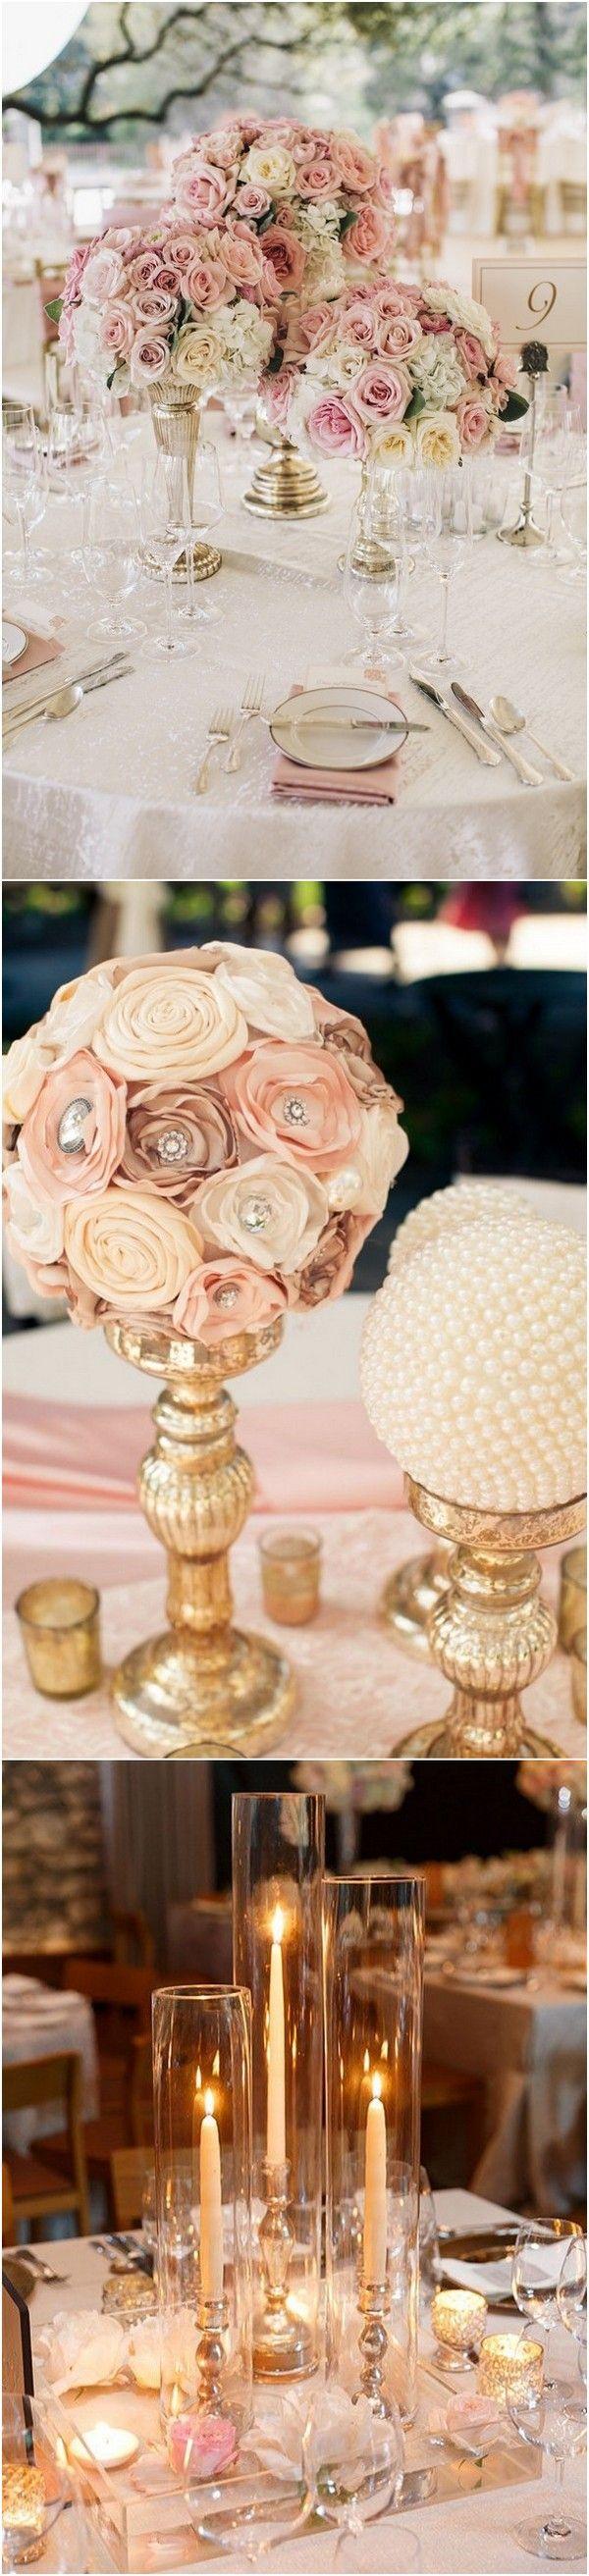 Hochzeit - Trending-18 Outstanding Wedding Centerpieces With Candlesticks - Page 3 Of 3